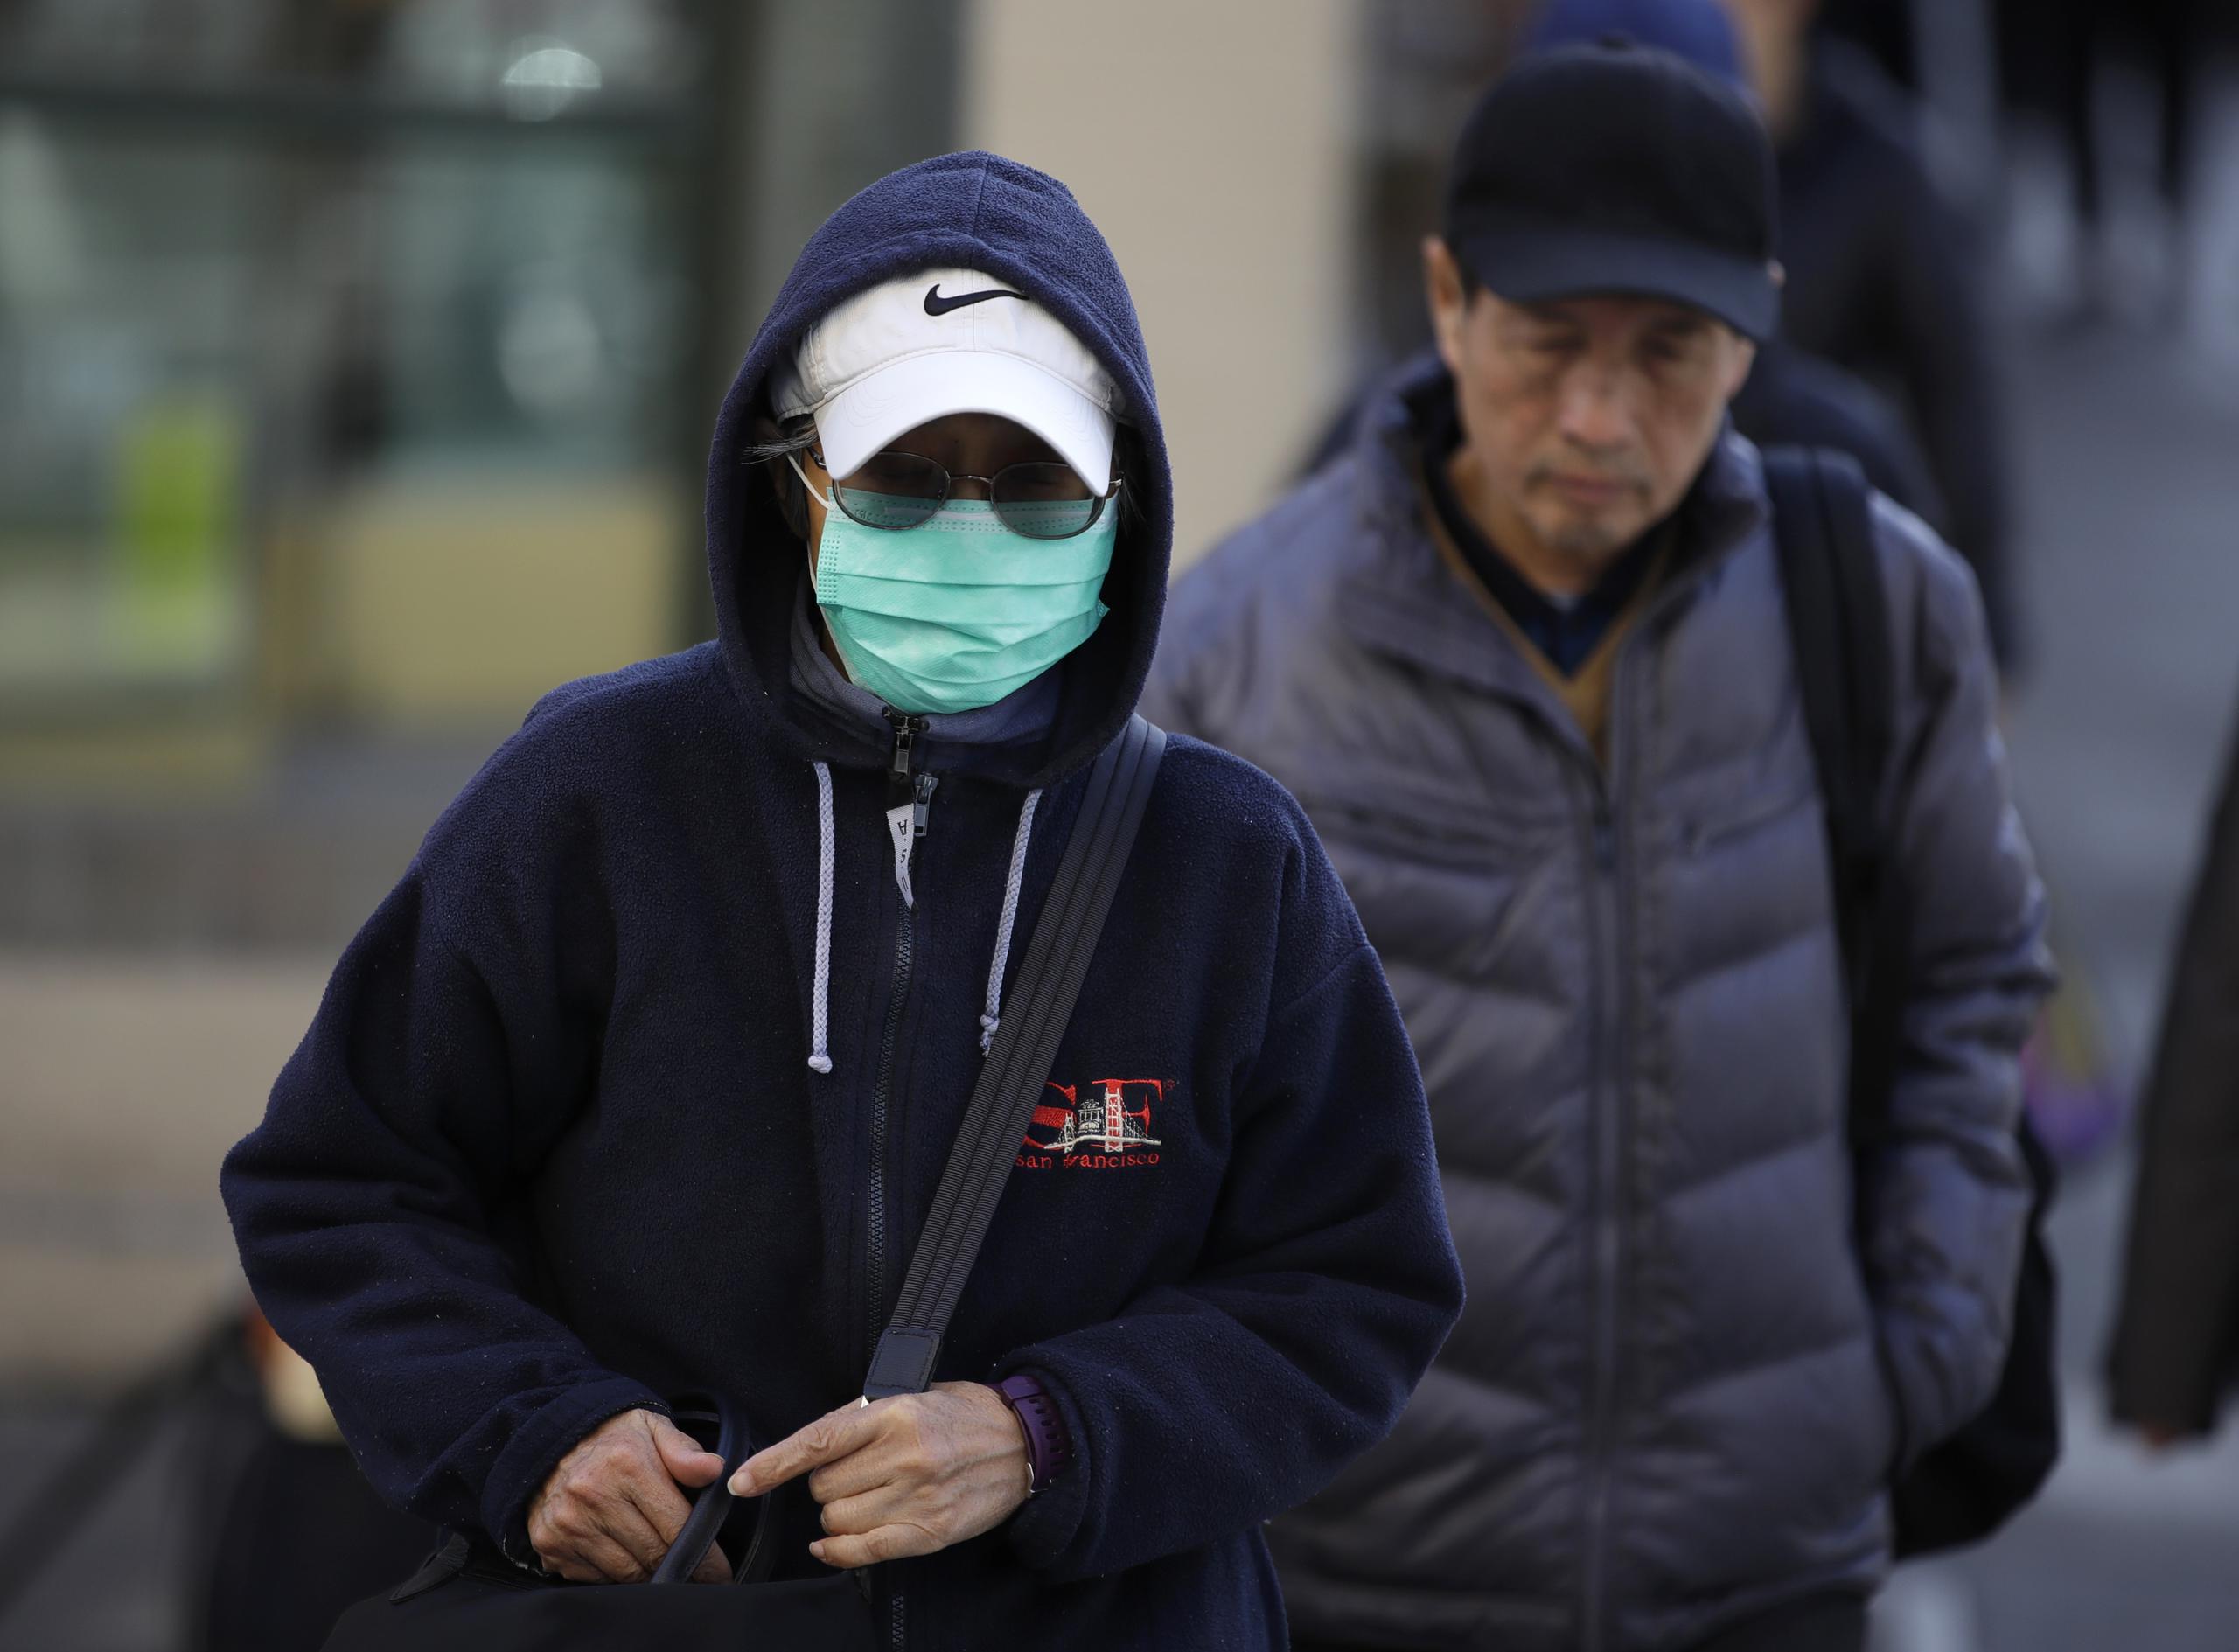 A masked woman walks a street in the Chinatown district of San Francisco on Friday, Jan. 31, 2020. As China grapples with the growing coronavirus outbreak, Chinese people in California are encountering a cultural disconnect as they brace for a possible spread of the virus in their adopted homeland. (AP Photo/Ben Margot)